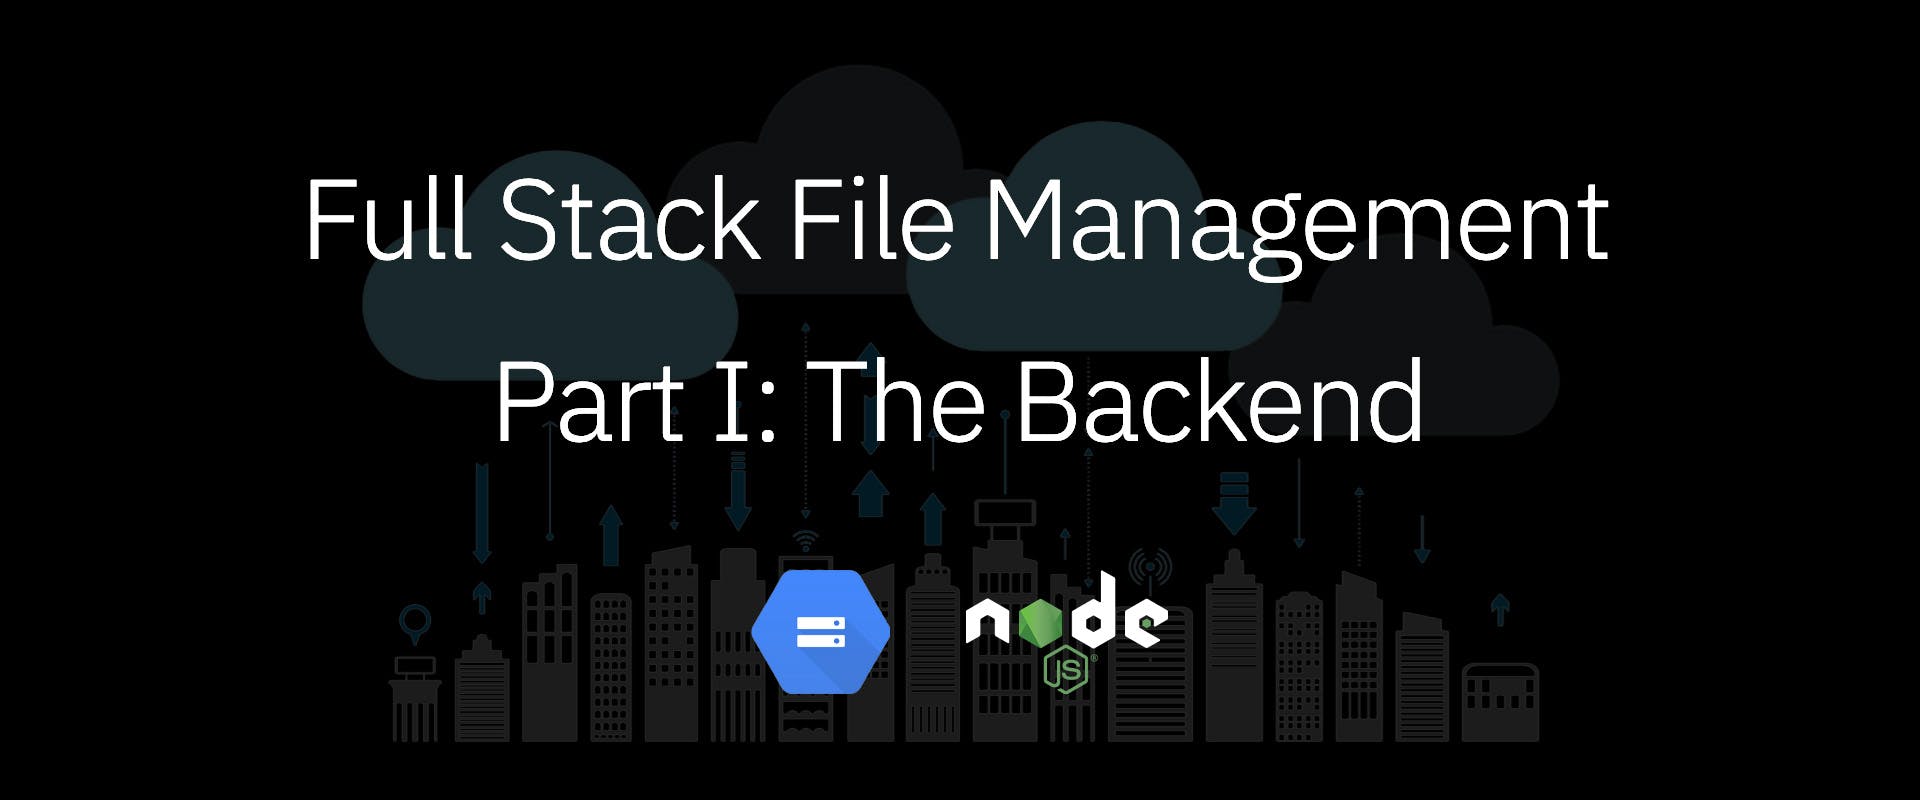 Full Stack File Management Part I: The Backend